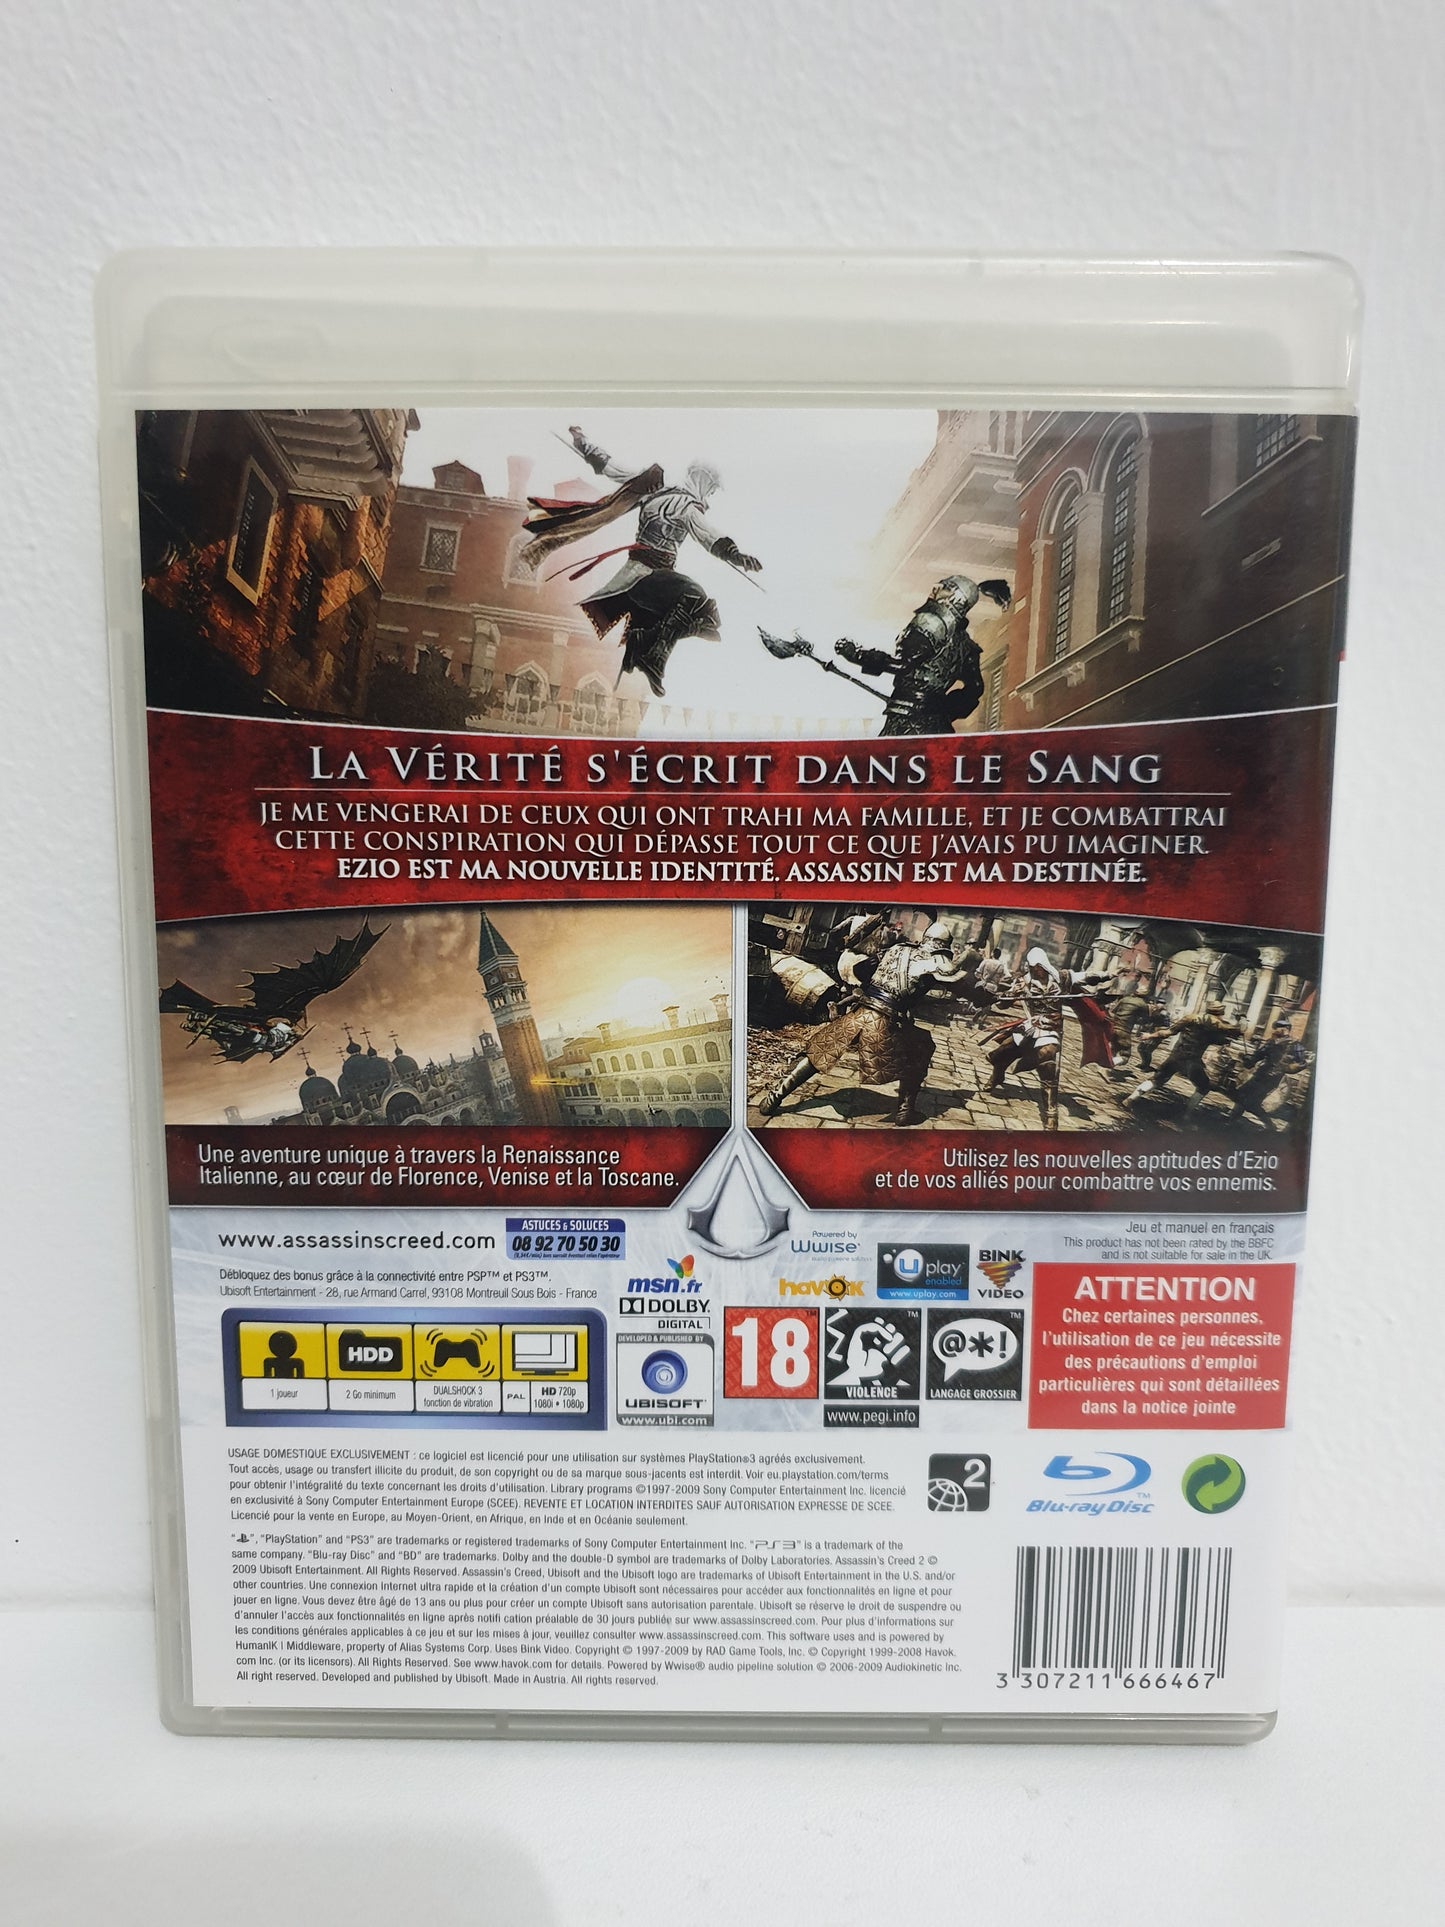 Assassin's Creed II PS3